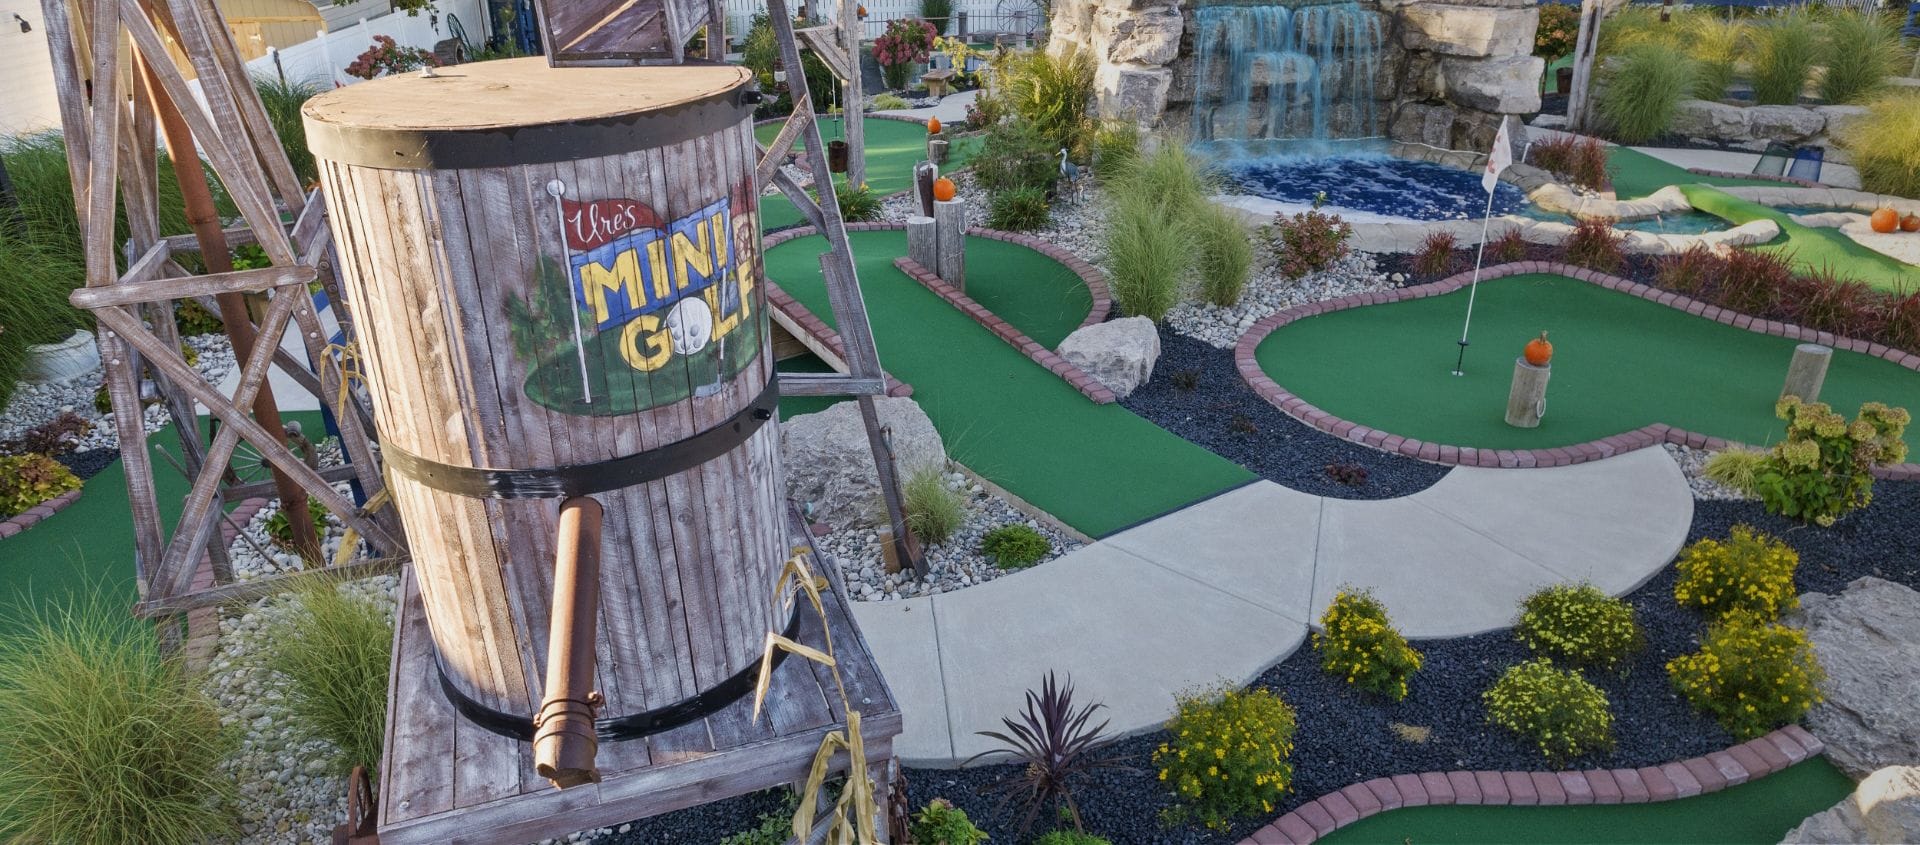 Ure's Mini Golf and Country Kitchen